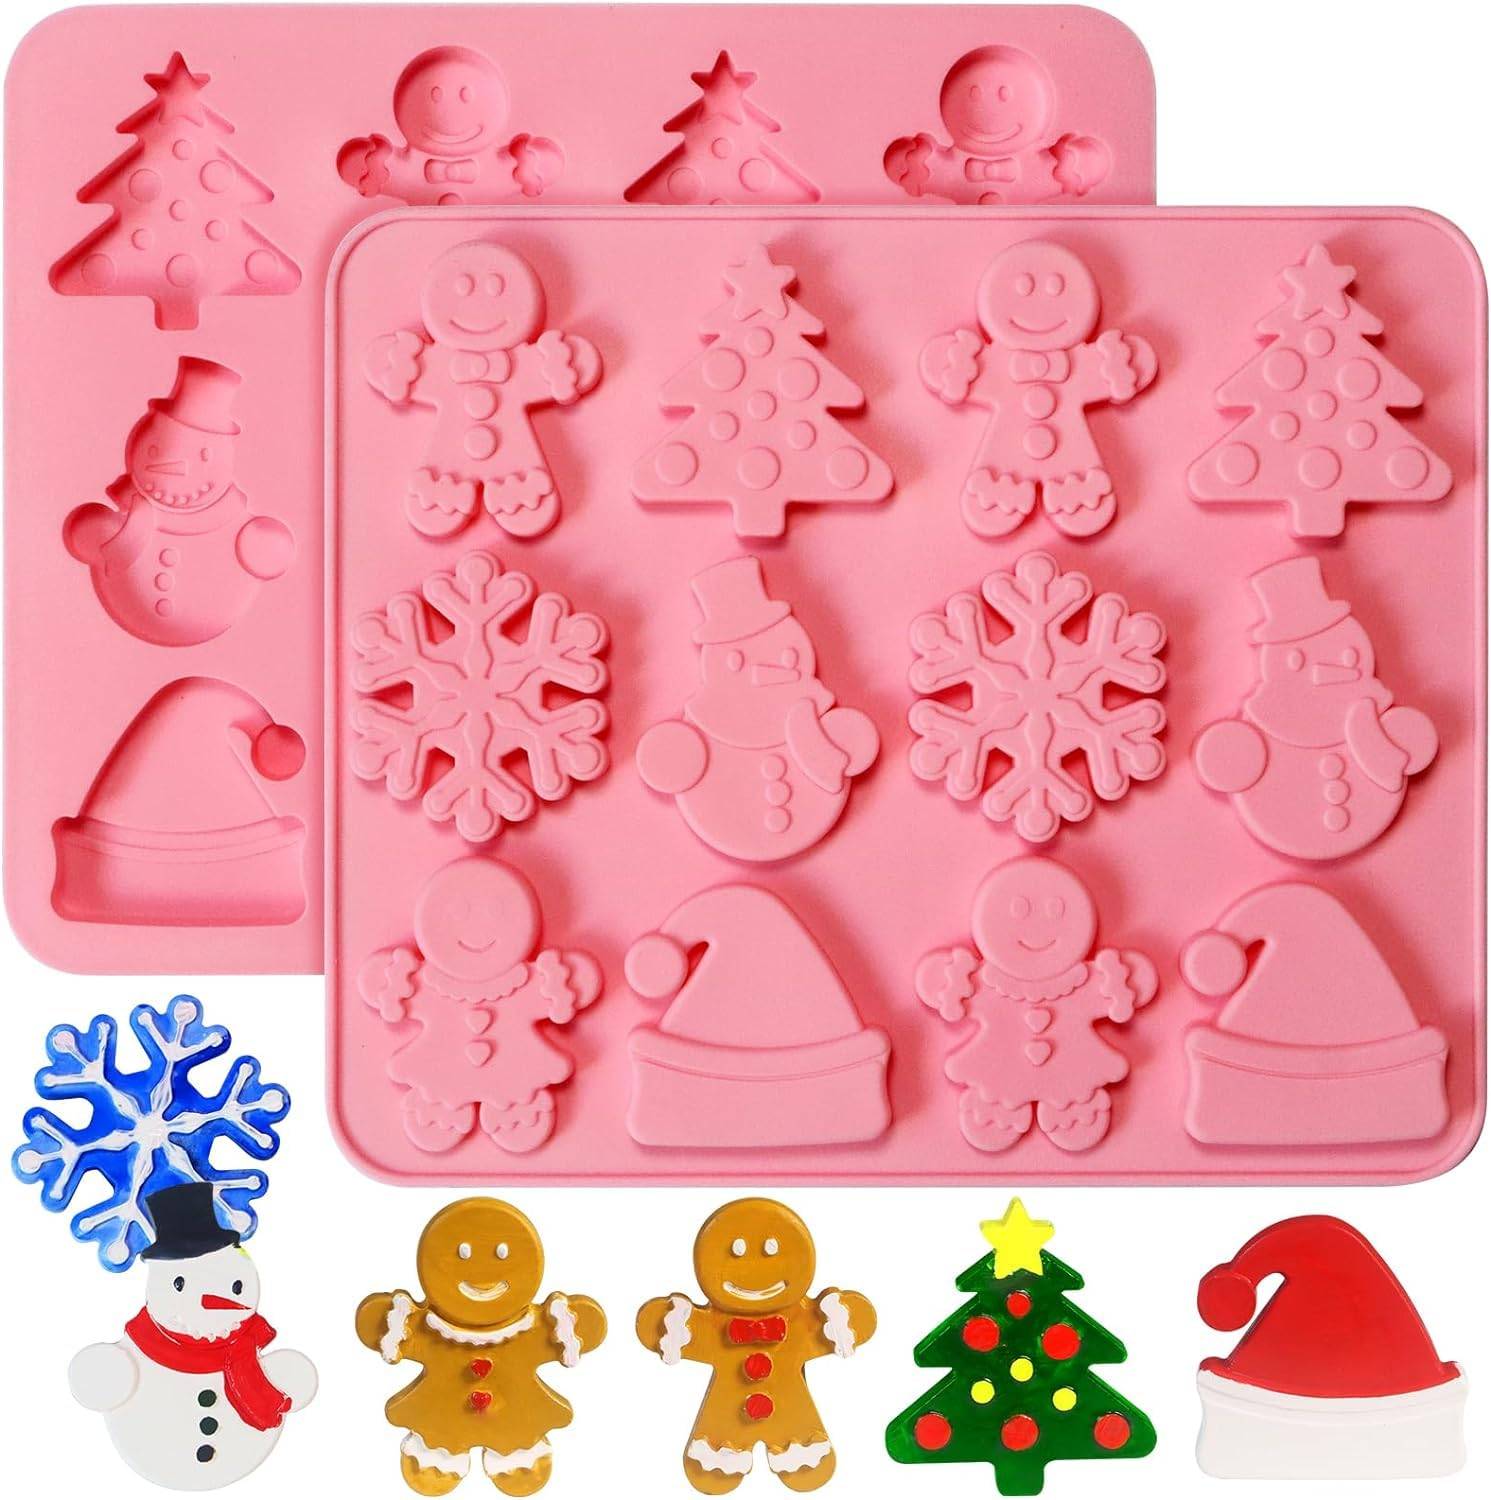 DIY Maple Leaf Silicone Mold Silicone Candy Chocolate Mold Fondant Cake  Decorating Tools Ice Cube Tray - Silicone Molds Wholesale & Retail -  Fondant, Soap, Candy, DIY Cake Molds